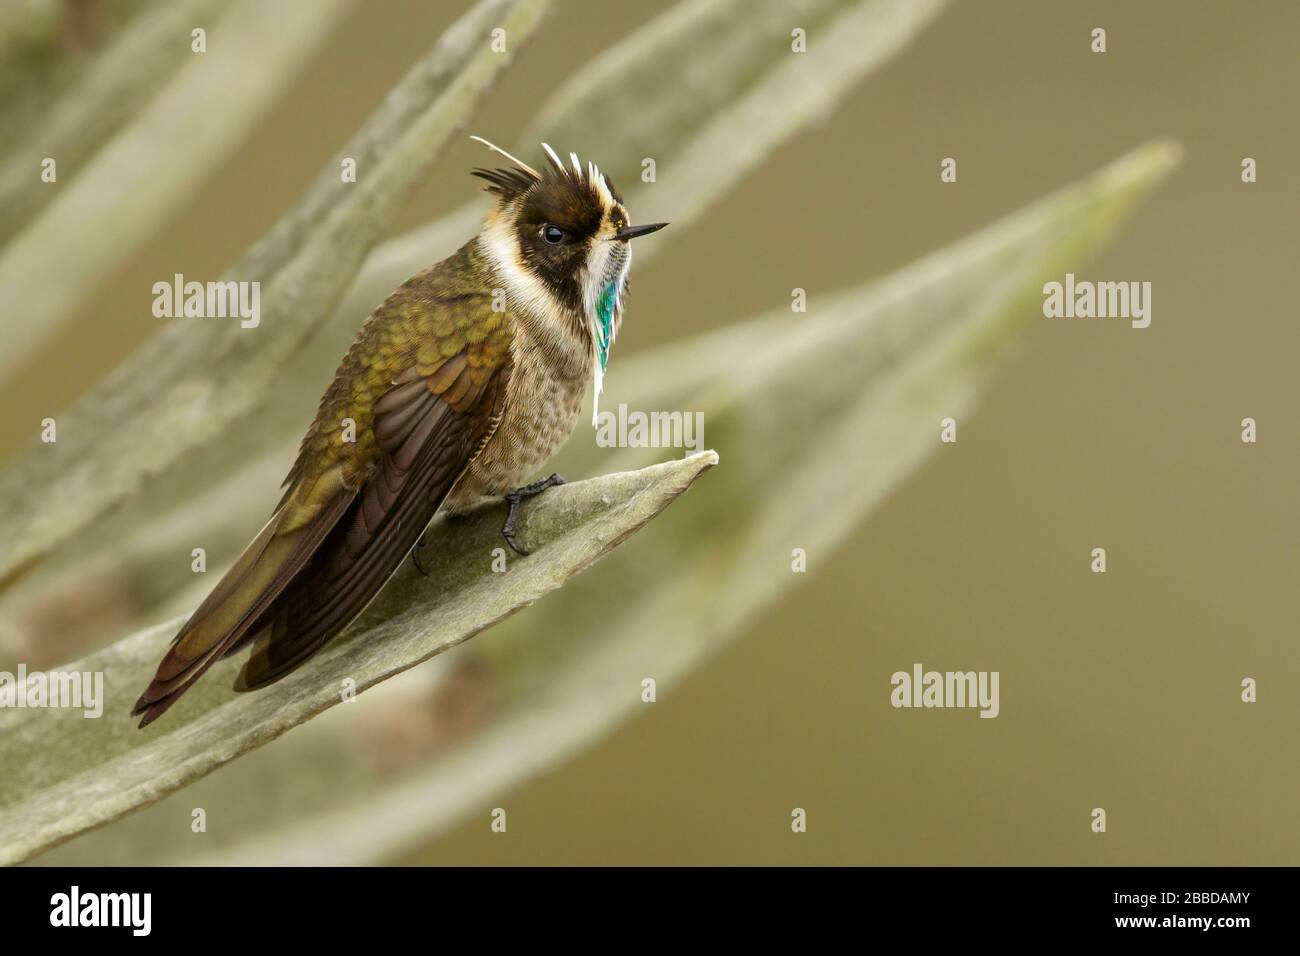 Green-bearded Helmetcrest (Oxypogon guerinii) perched on a branch in the Andes mountains in Colombia. Stock Photo